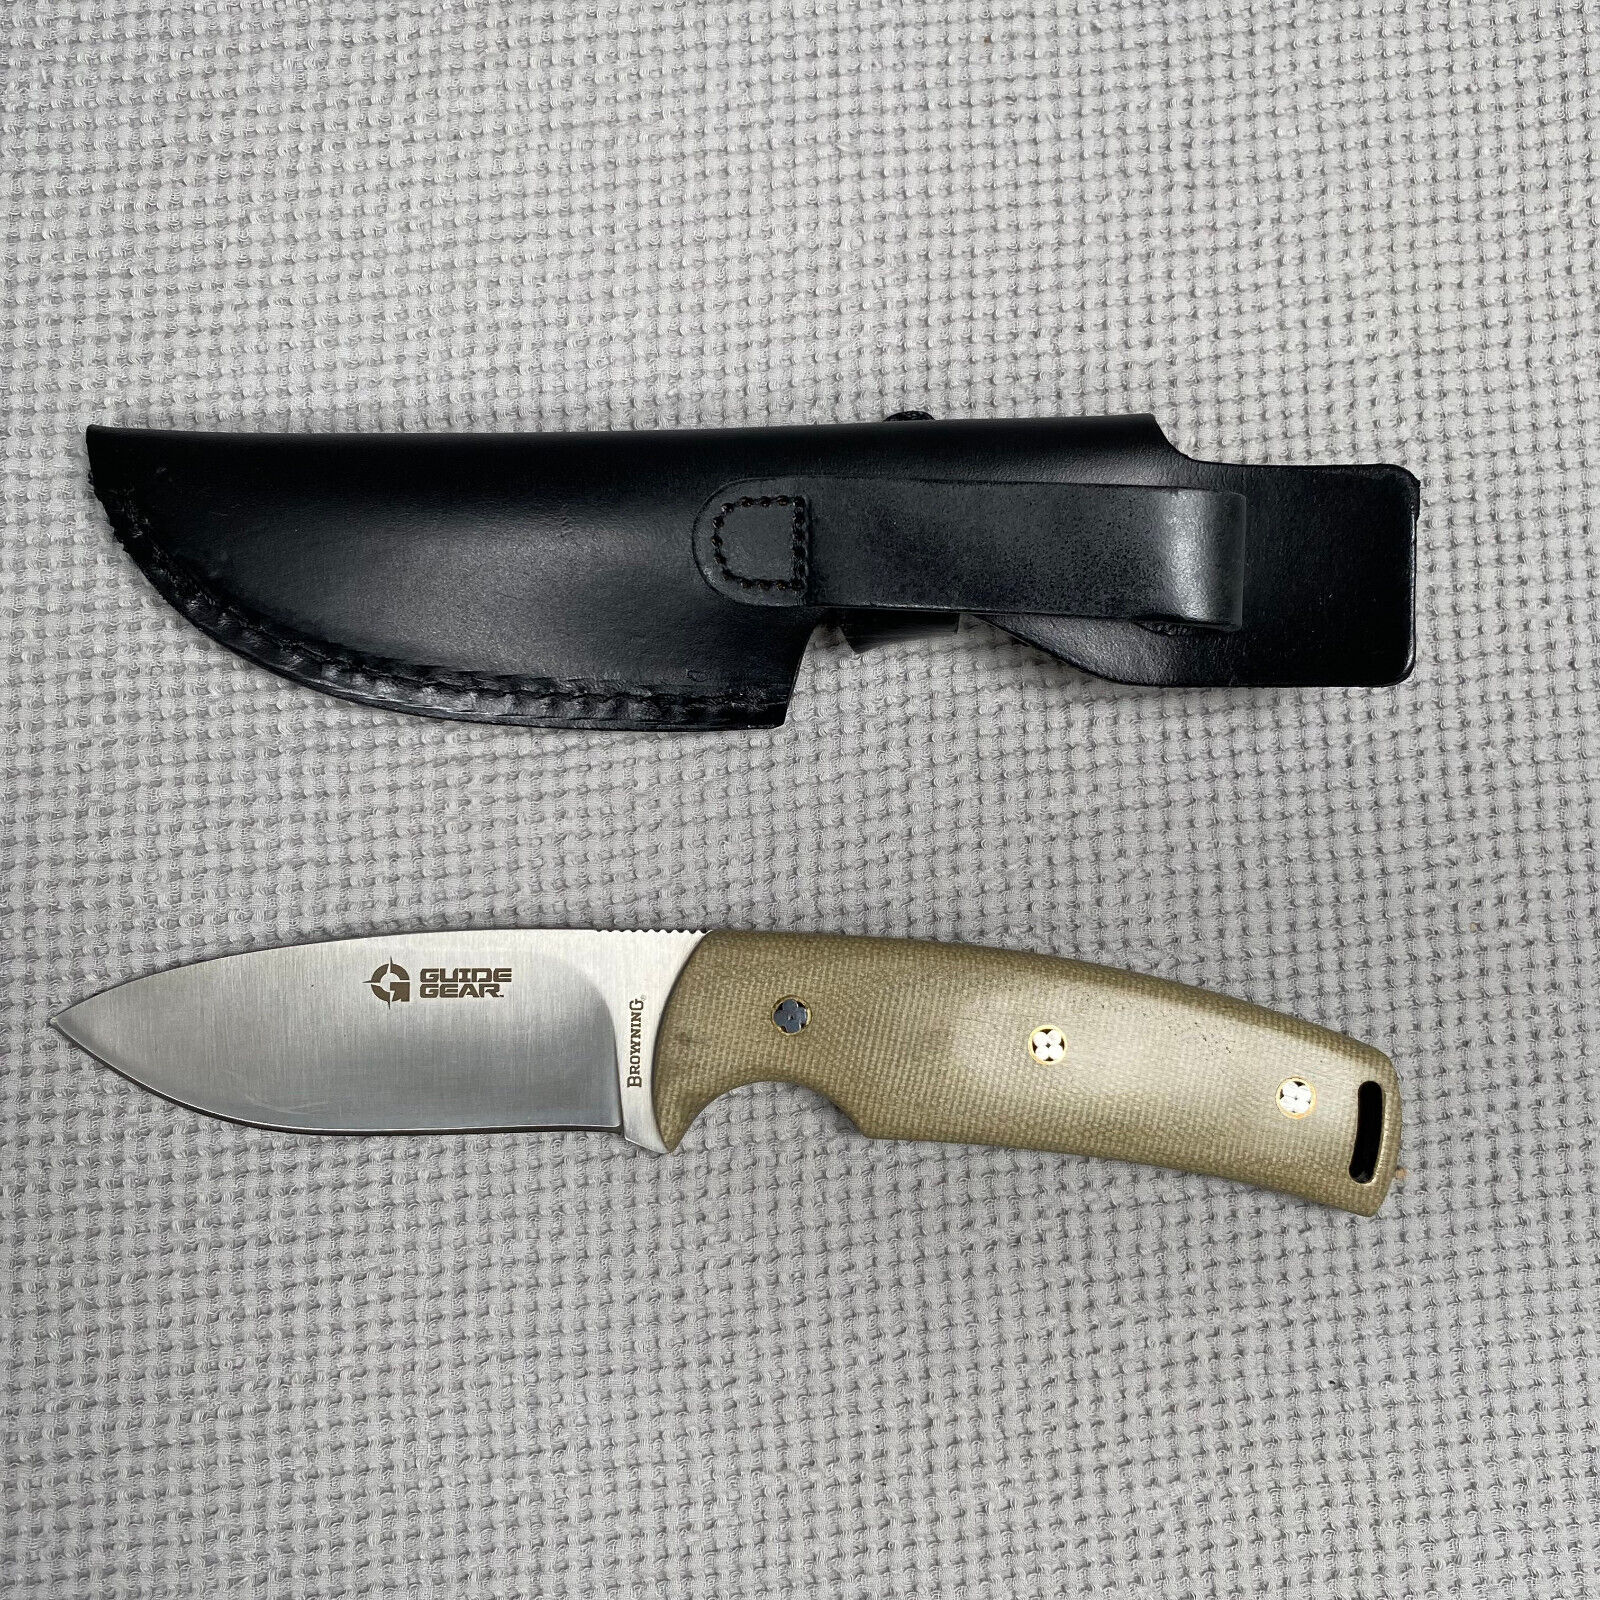 Browning Bushcraft Knife Guide Gear 7Cr17MoV Fixed Blade Knife with Sheath